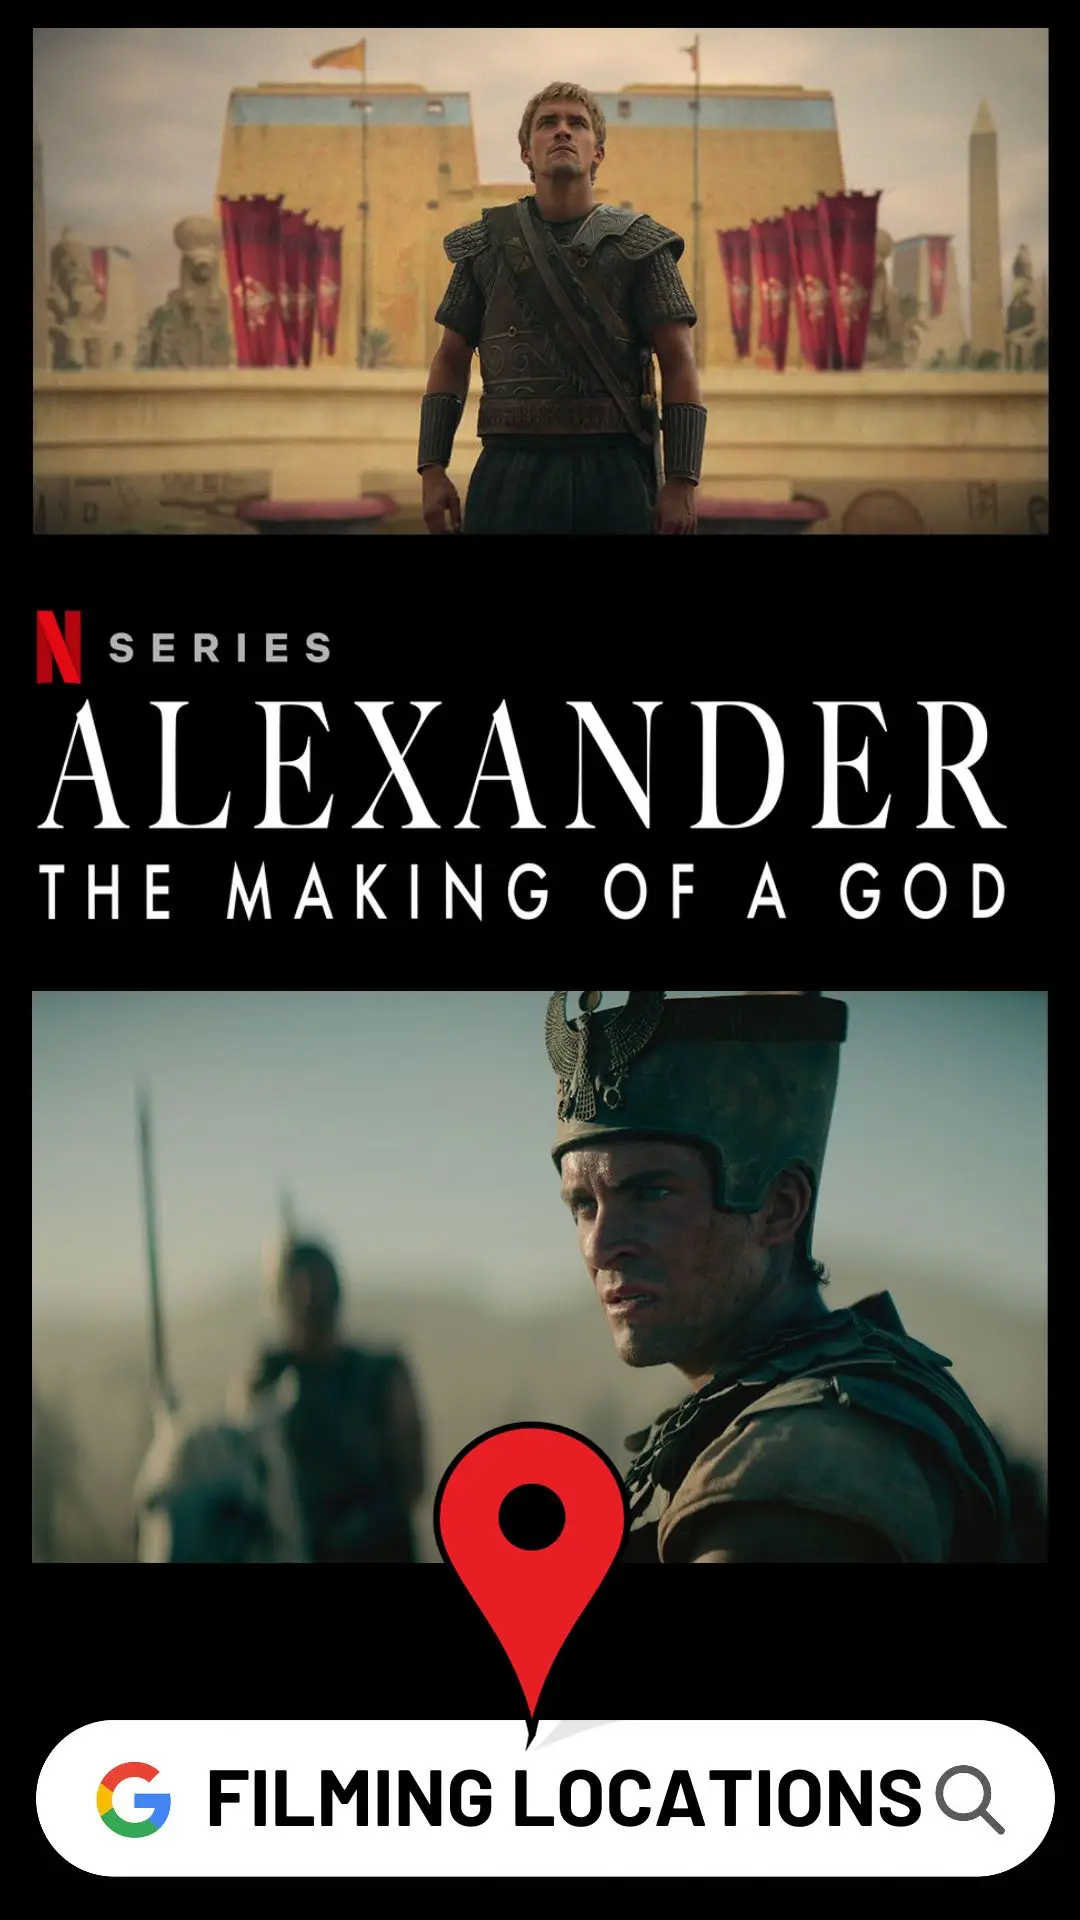 Alexander The Making of a God Filming Locations